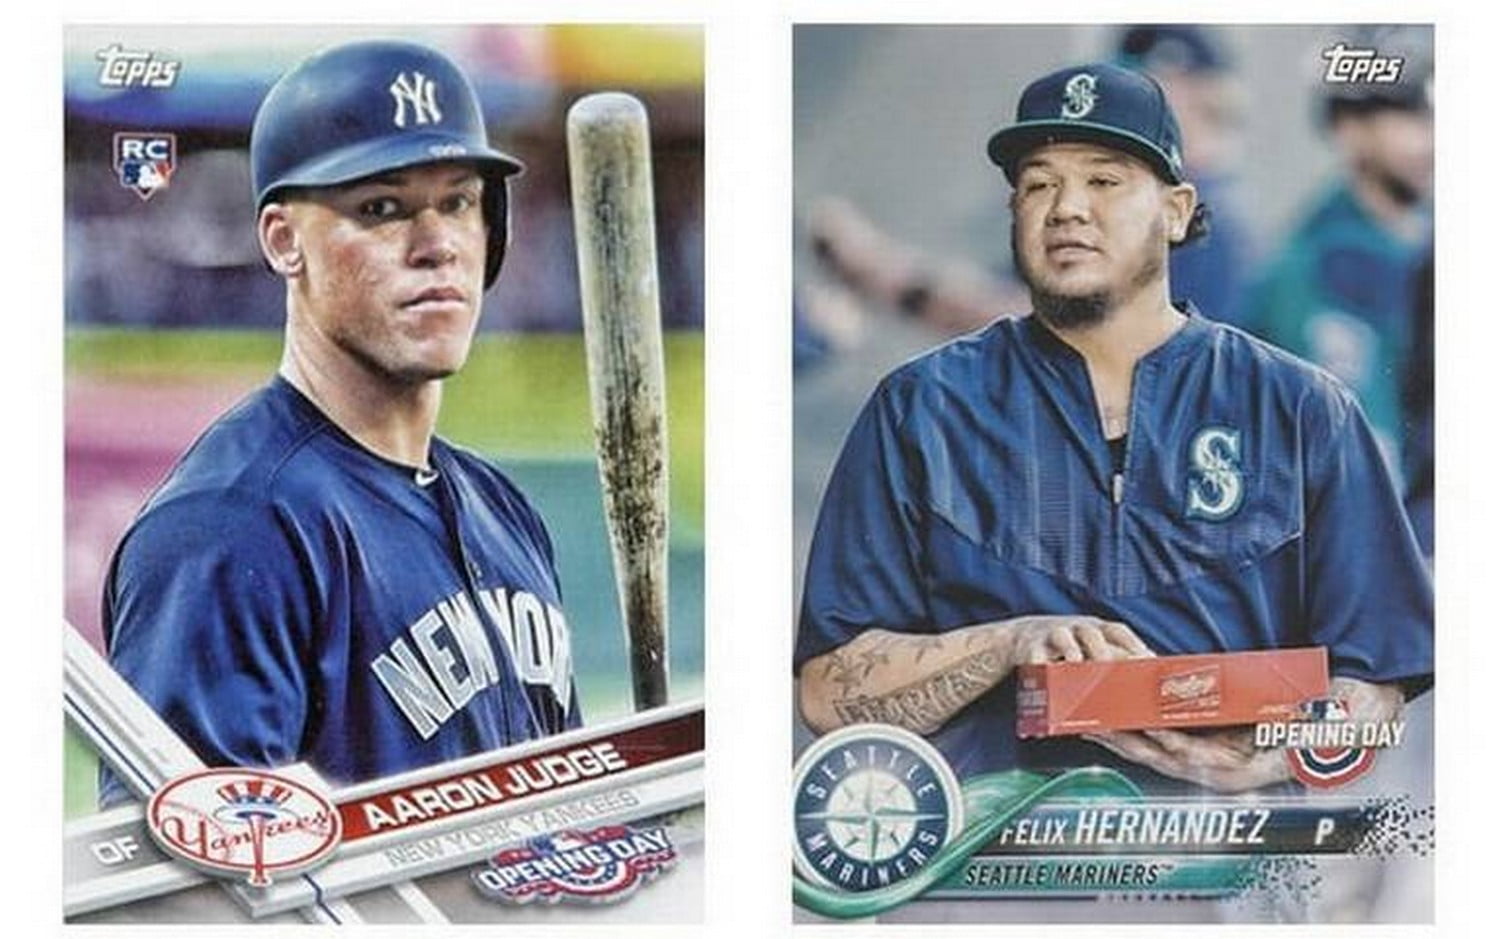 The Best Way to Sell Baseball Cards - American Legends